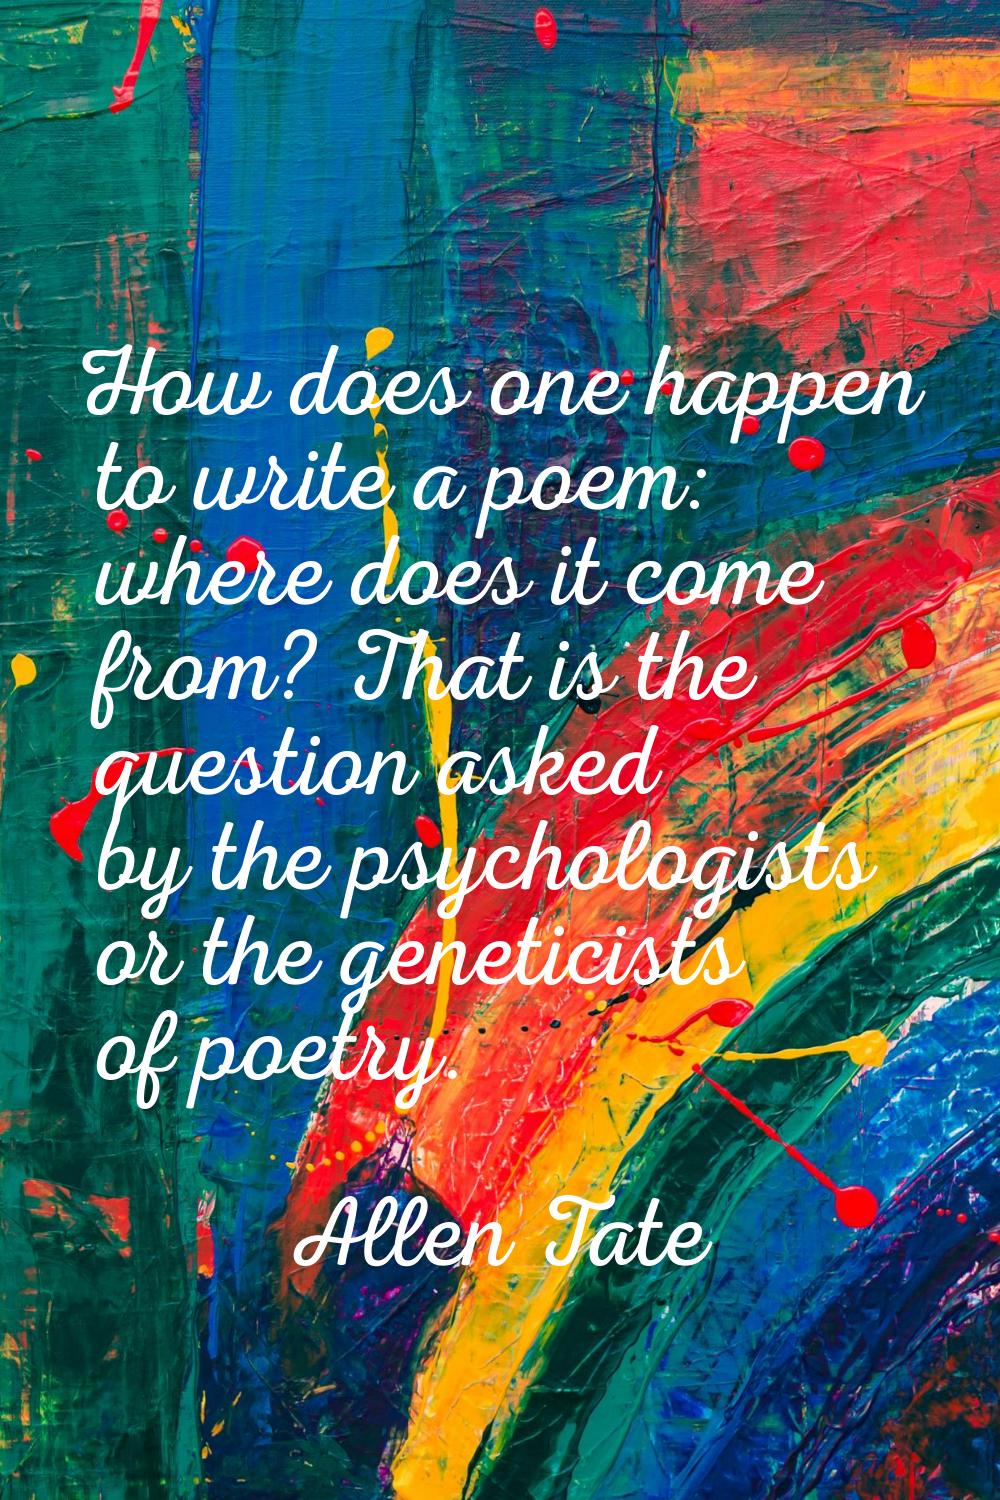 How does one happen to write a poem: where does it come from? That is the question asked by the psy